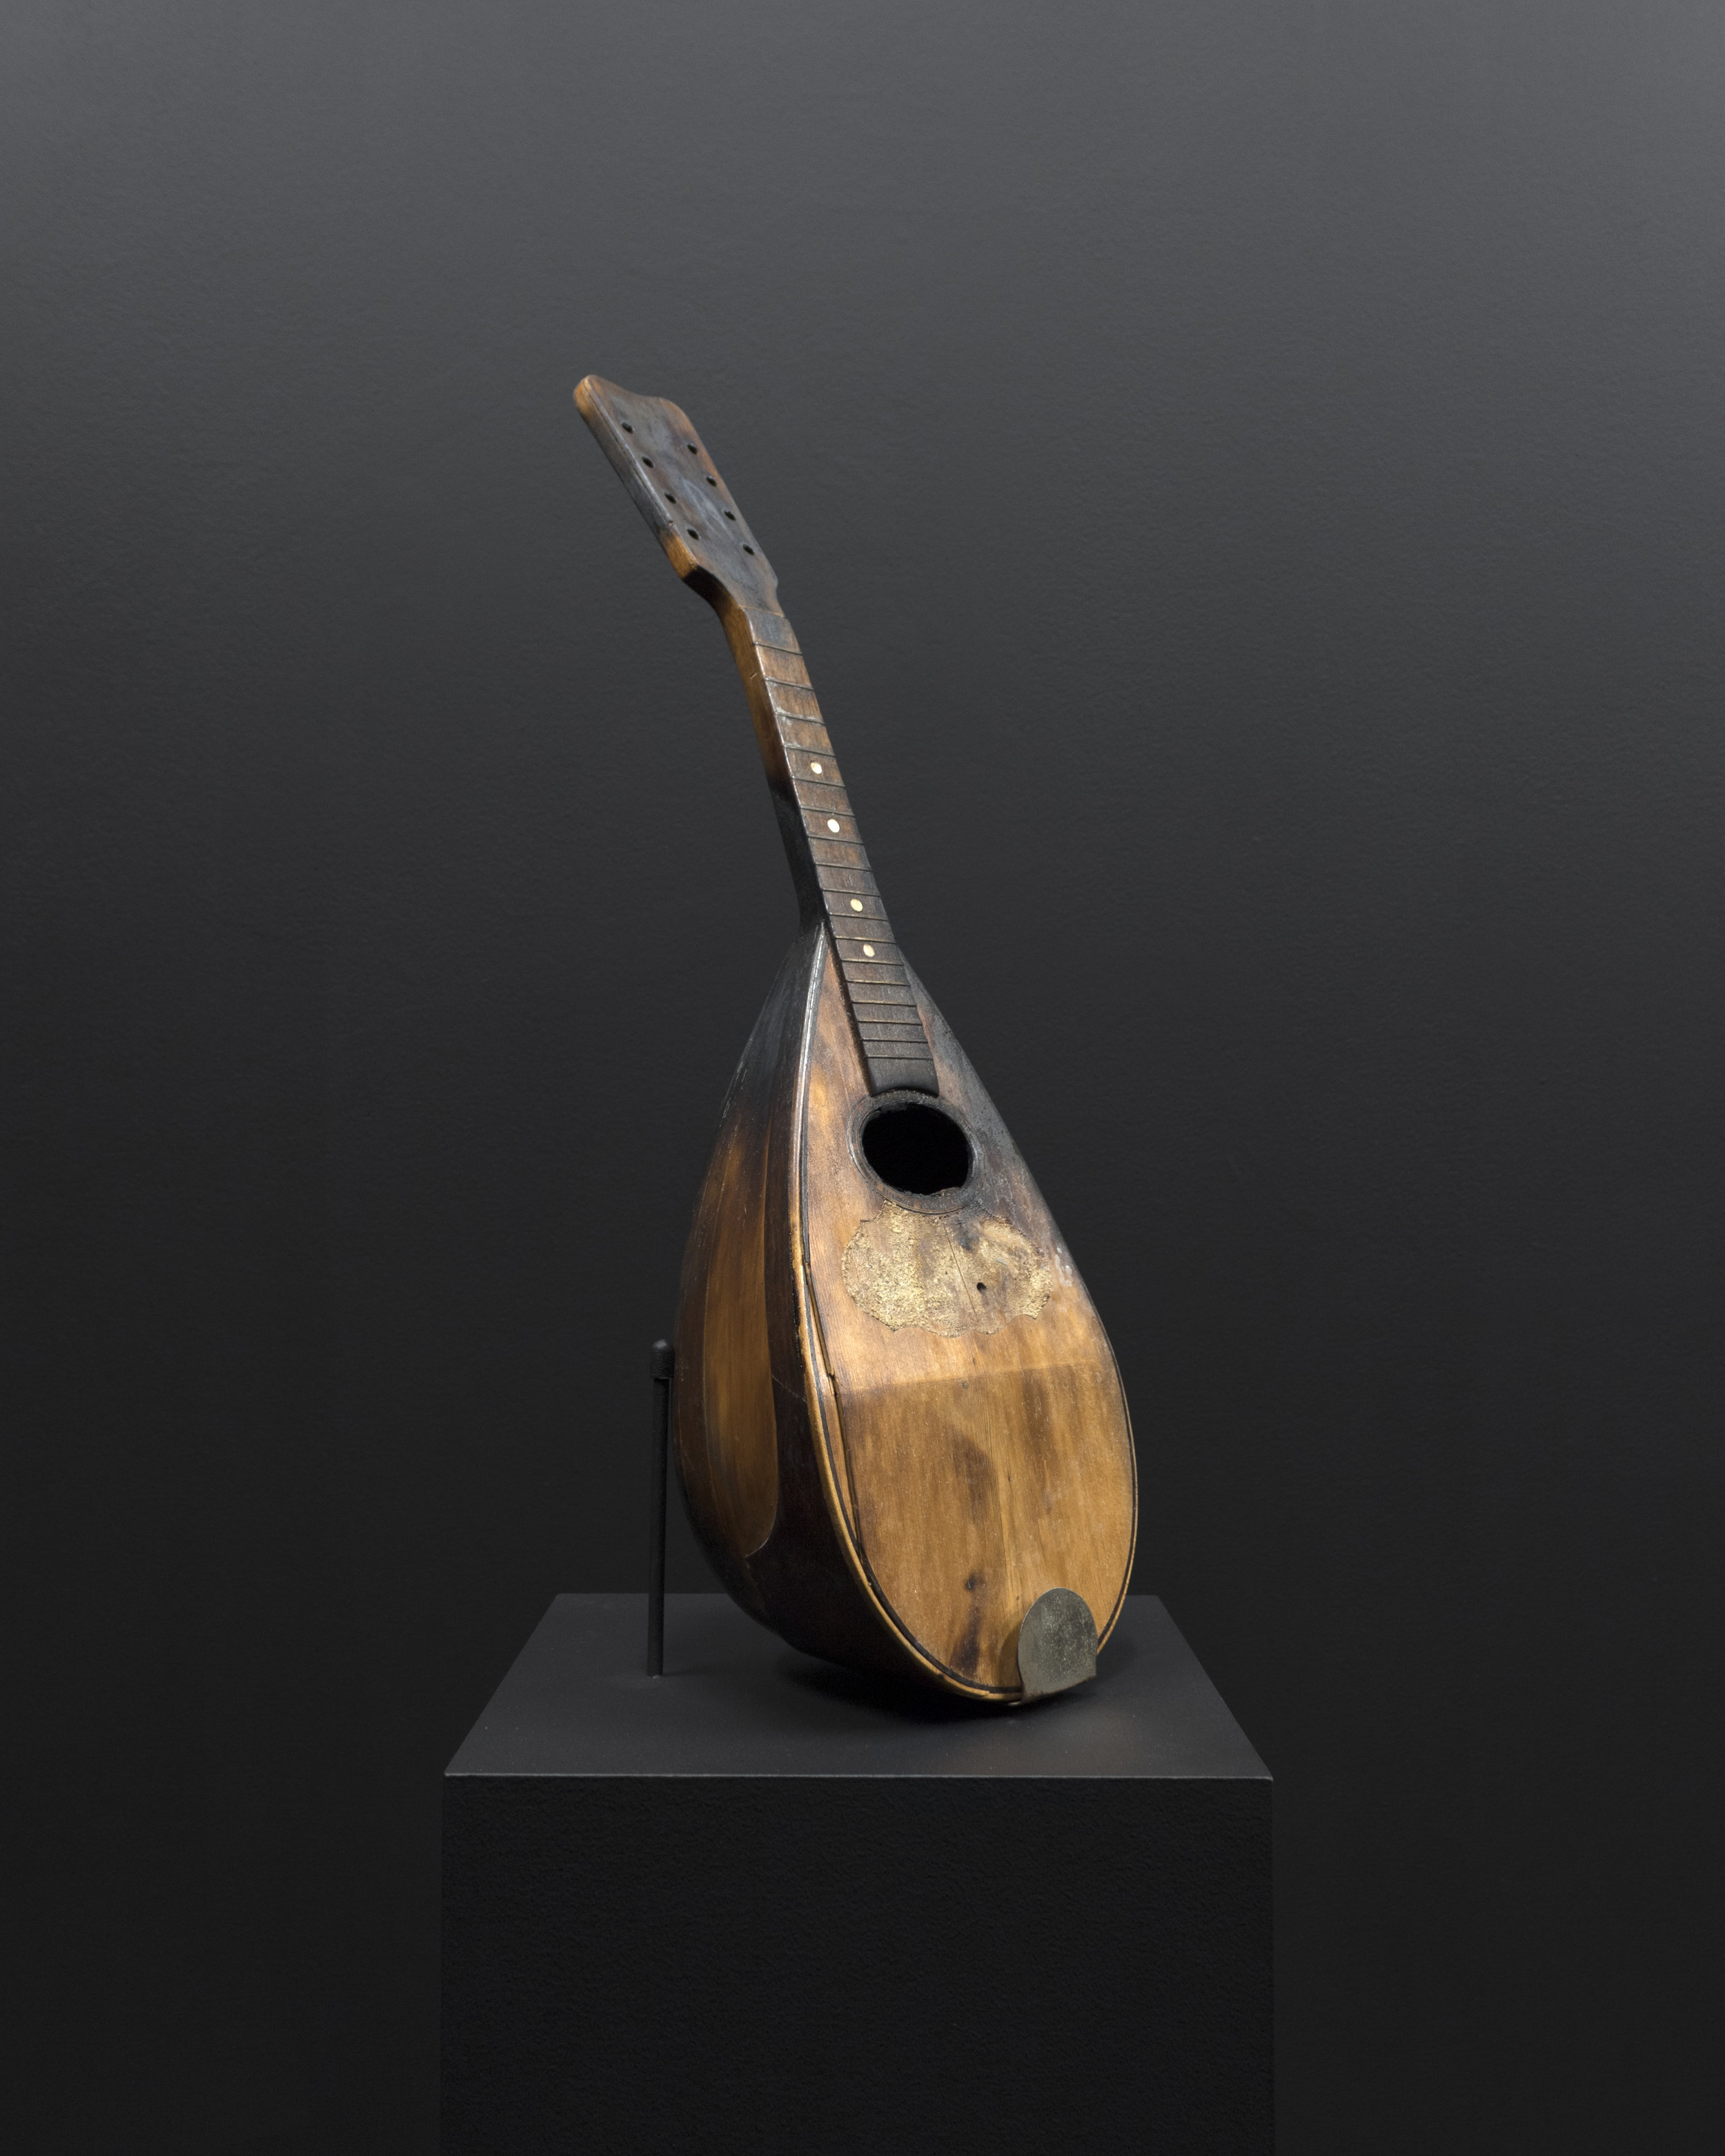  Micca Schippa,  separation of pieces of an organism caused by natural events (i.e. floods, scavengers etc.) , Antique bowl back mandolin. 2018. 